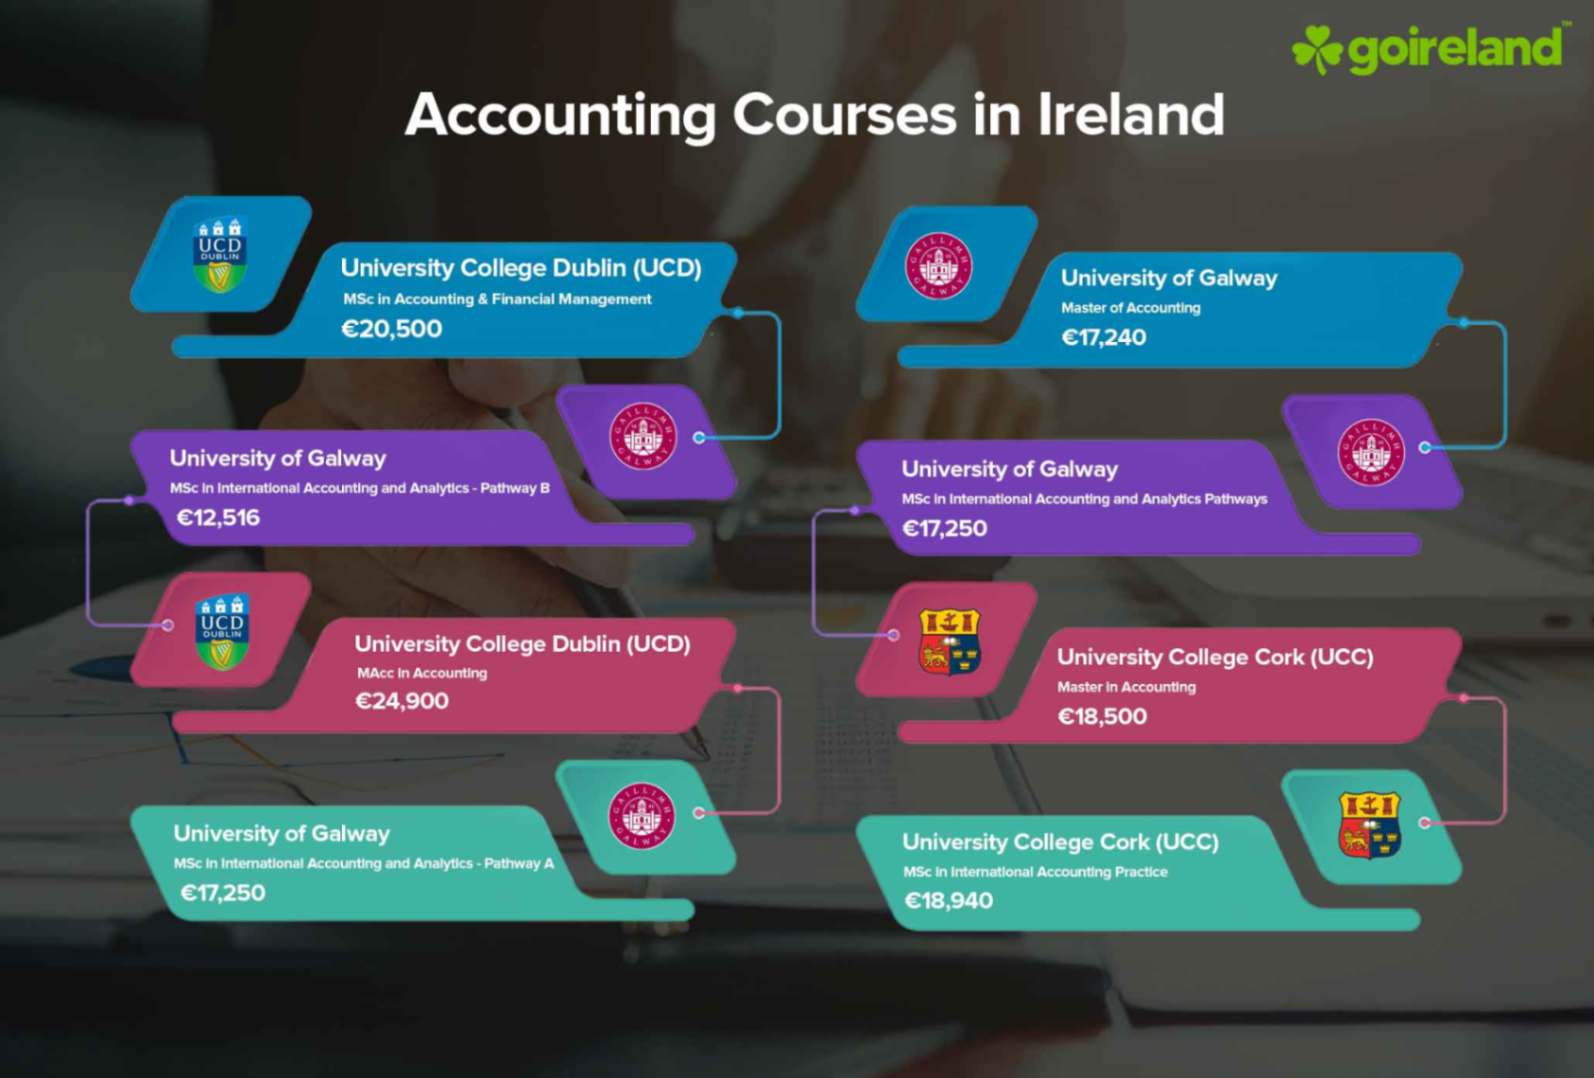 Accounting in Ireland